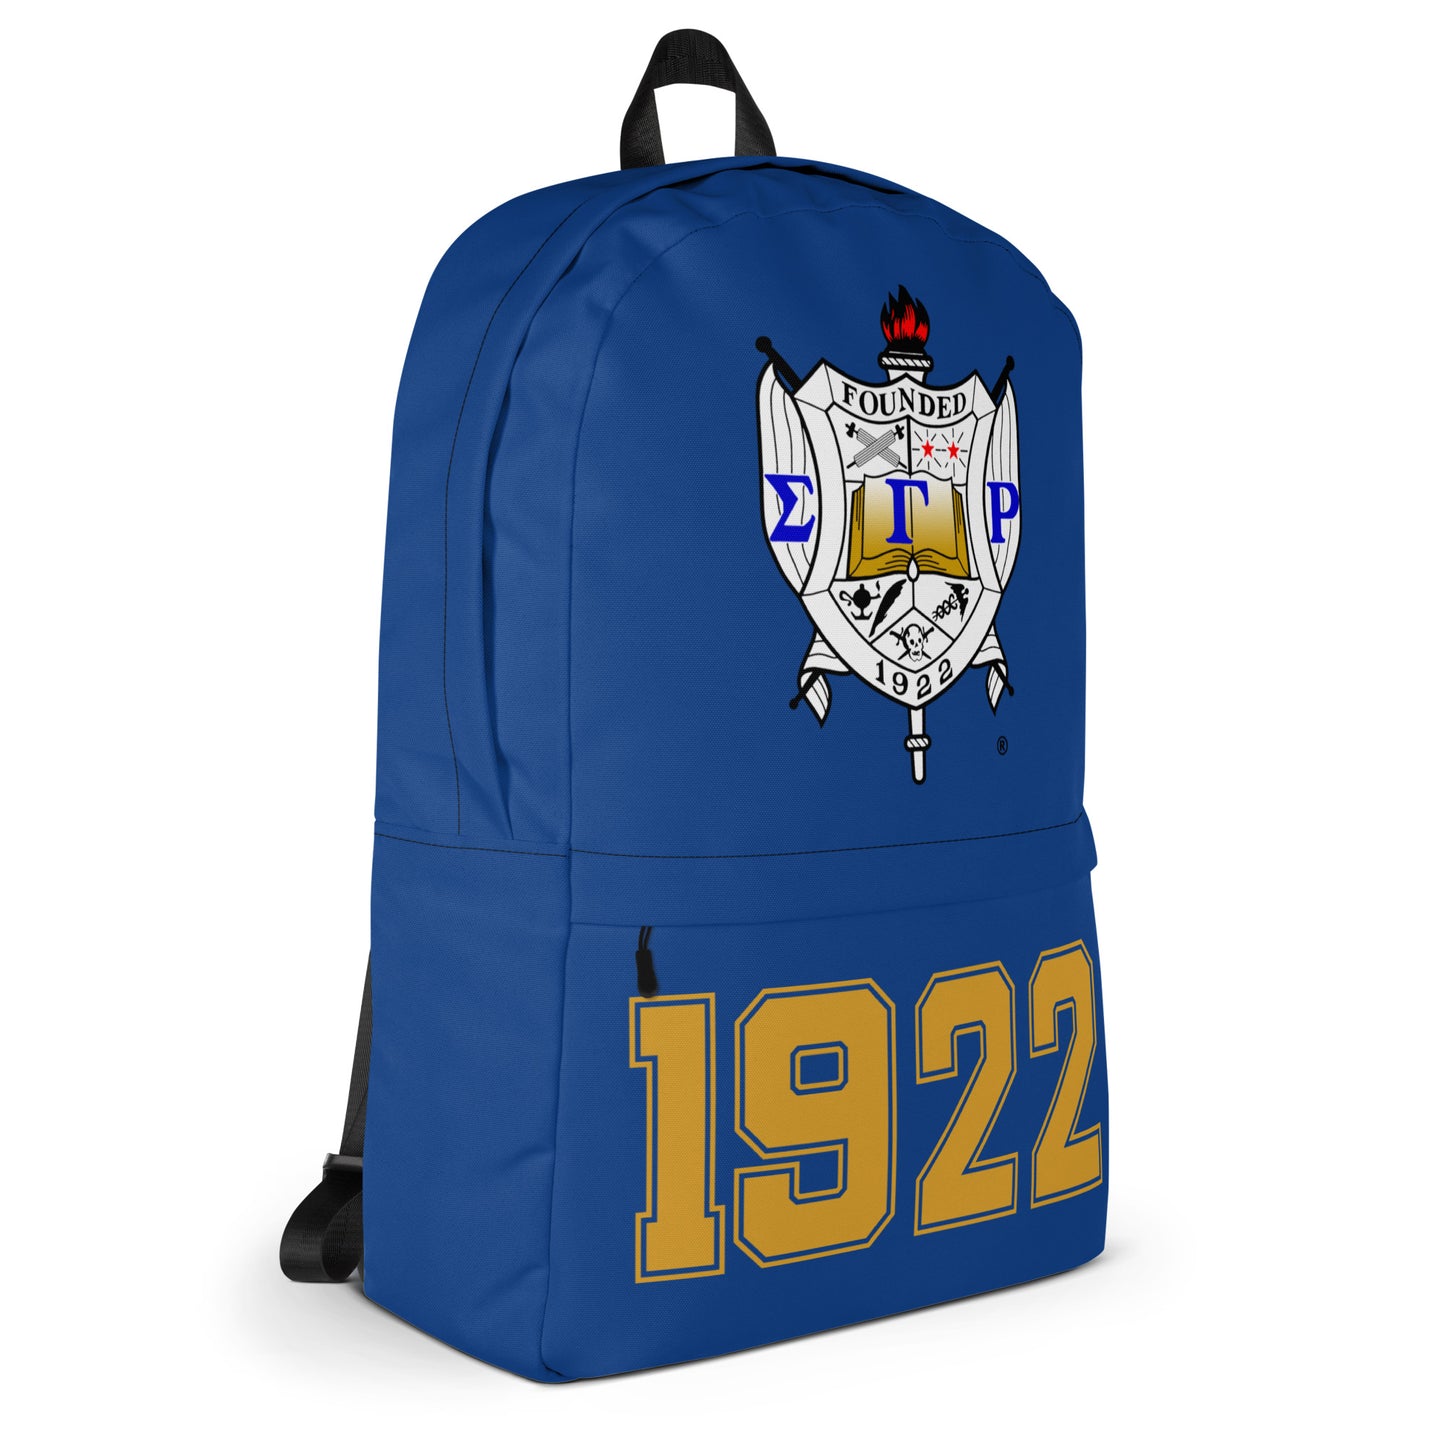 SGRho Crest and Year Backpack